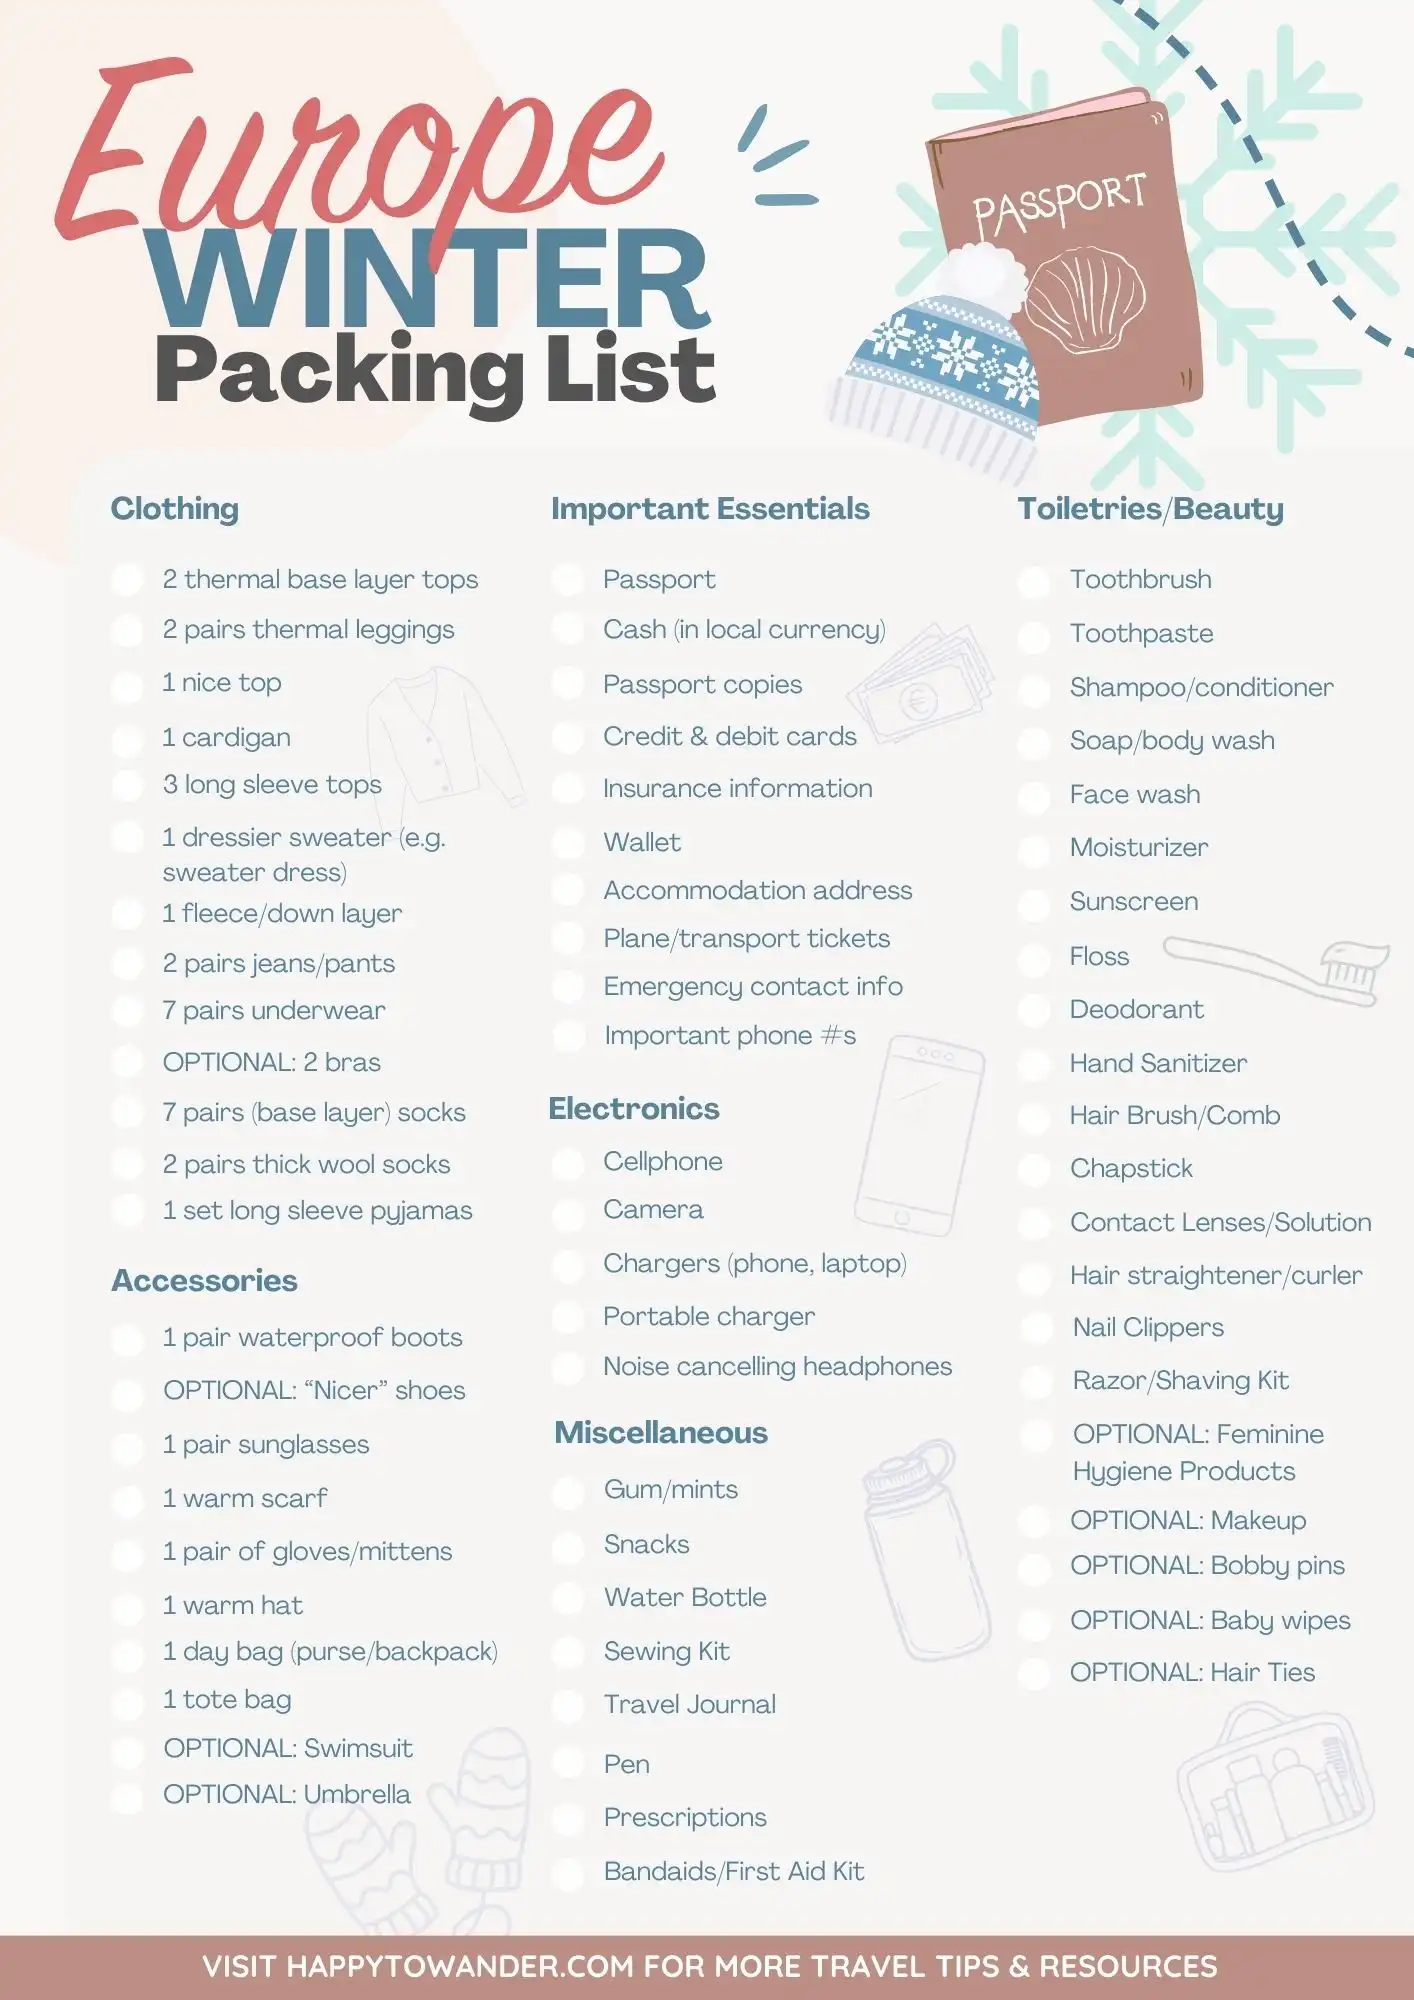 Don't forget your FREE Winter in Europe Packing List!